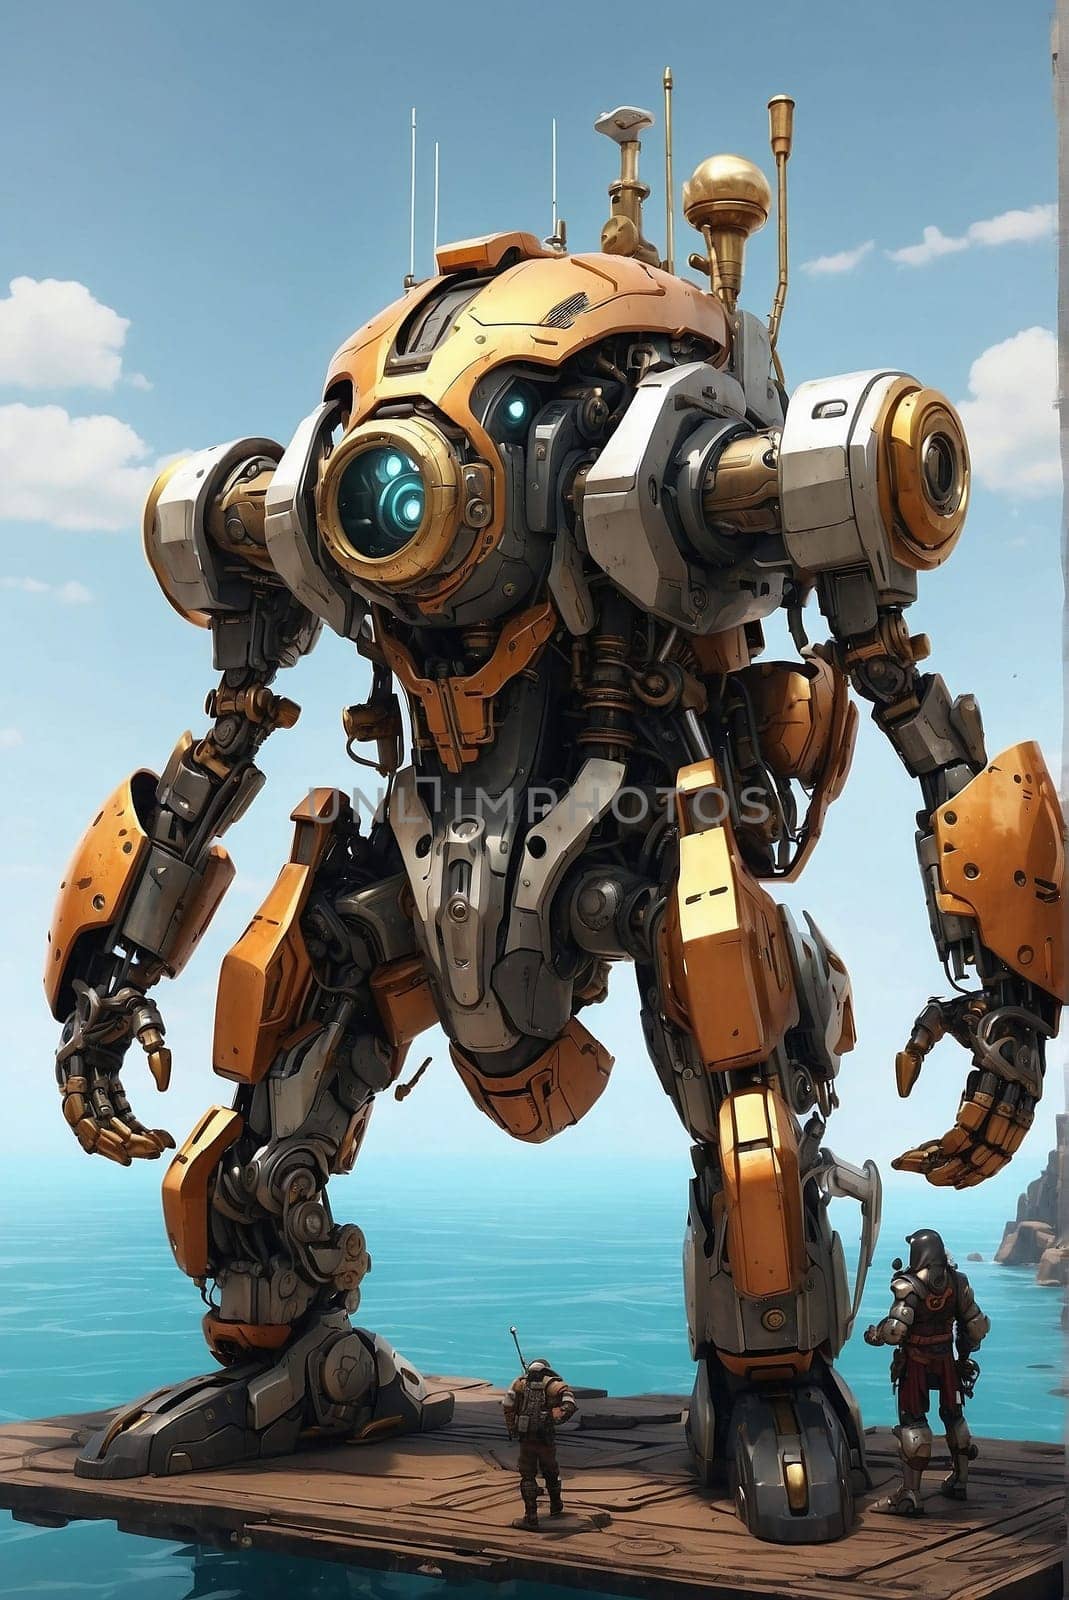 A massive robot standing on the pier, showcasing its towering presence and futuristic design.